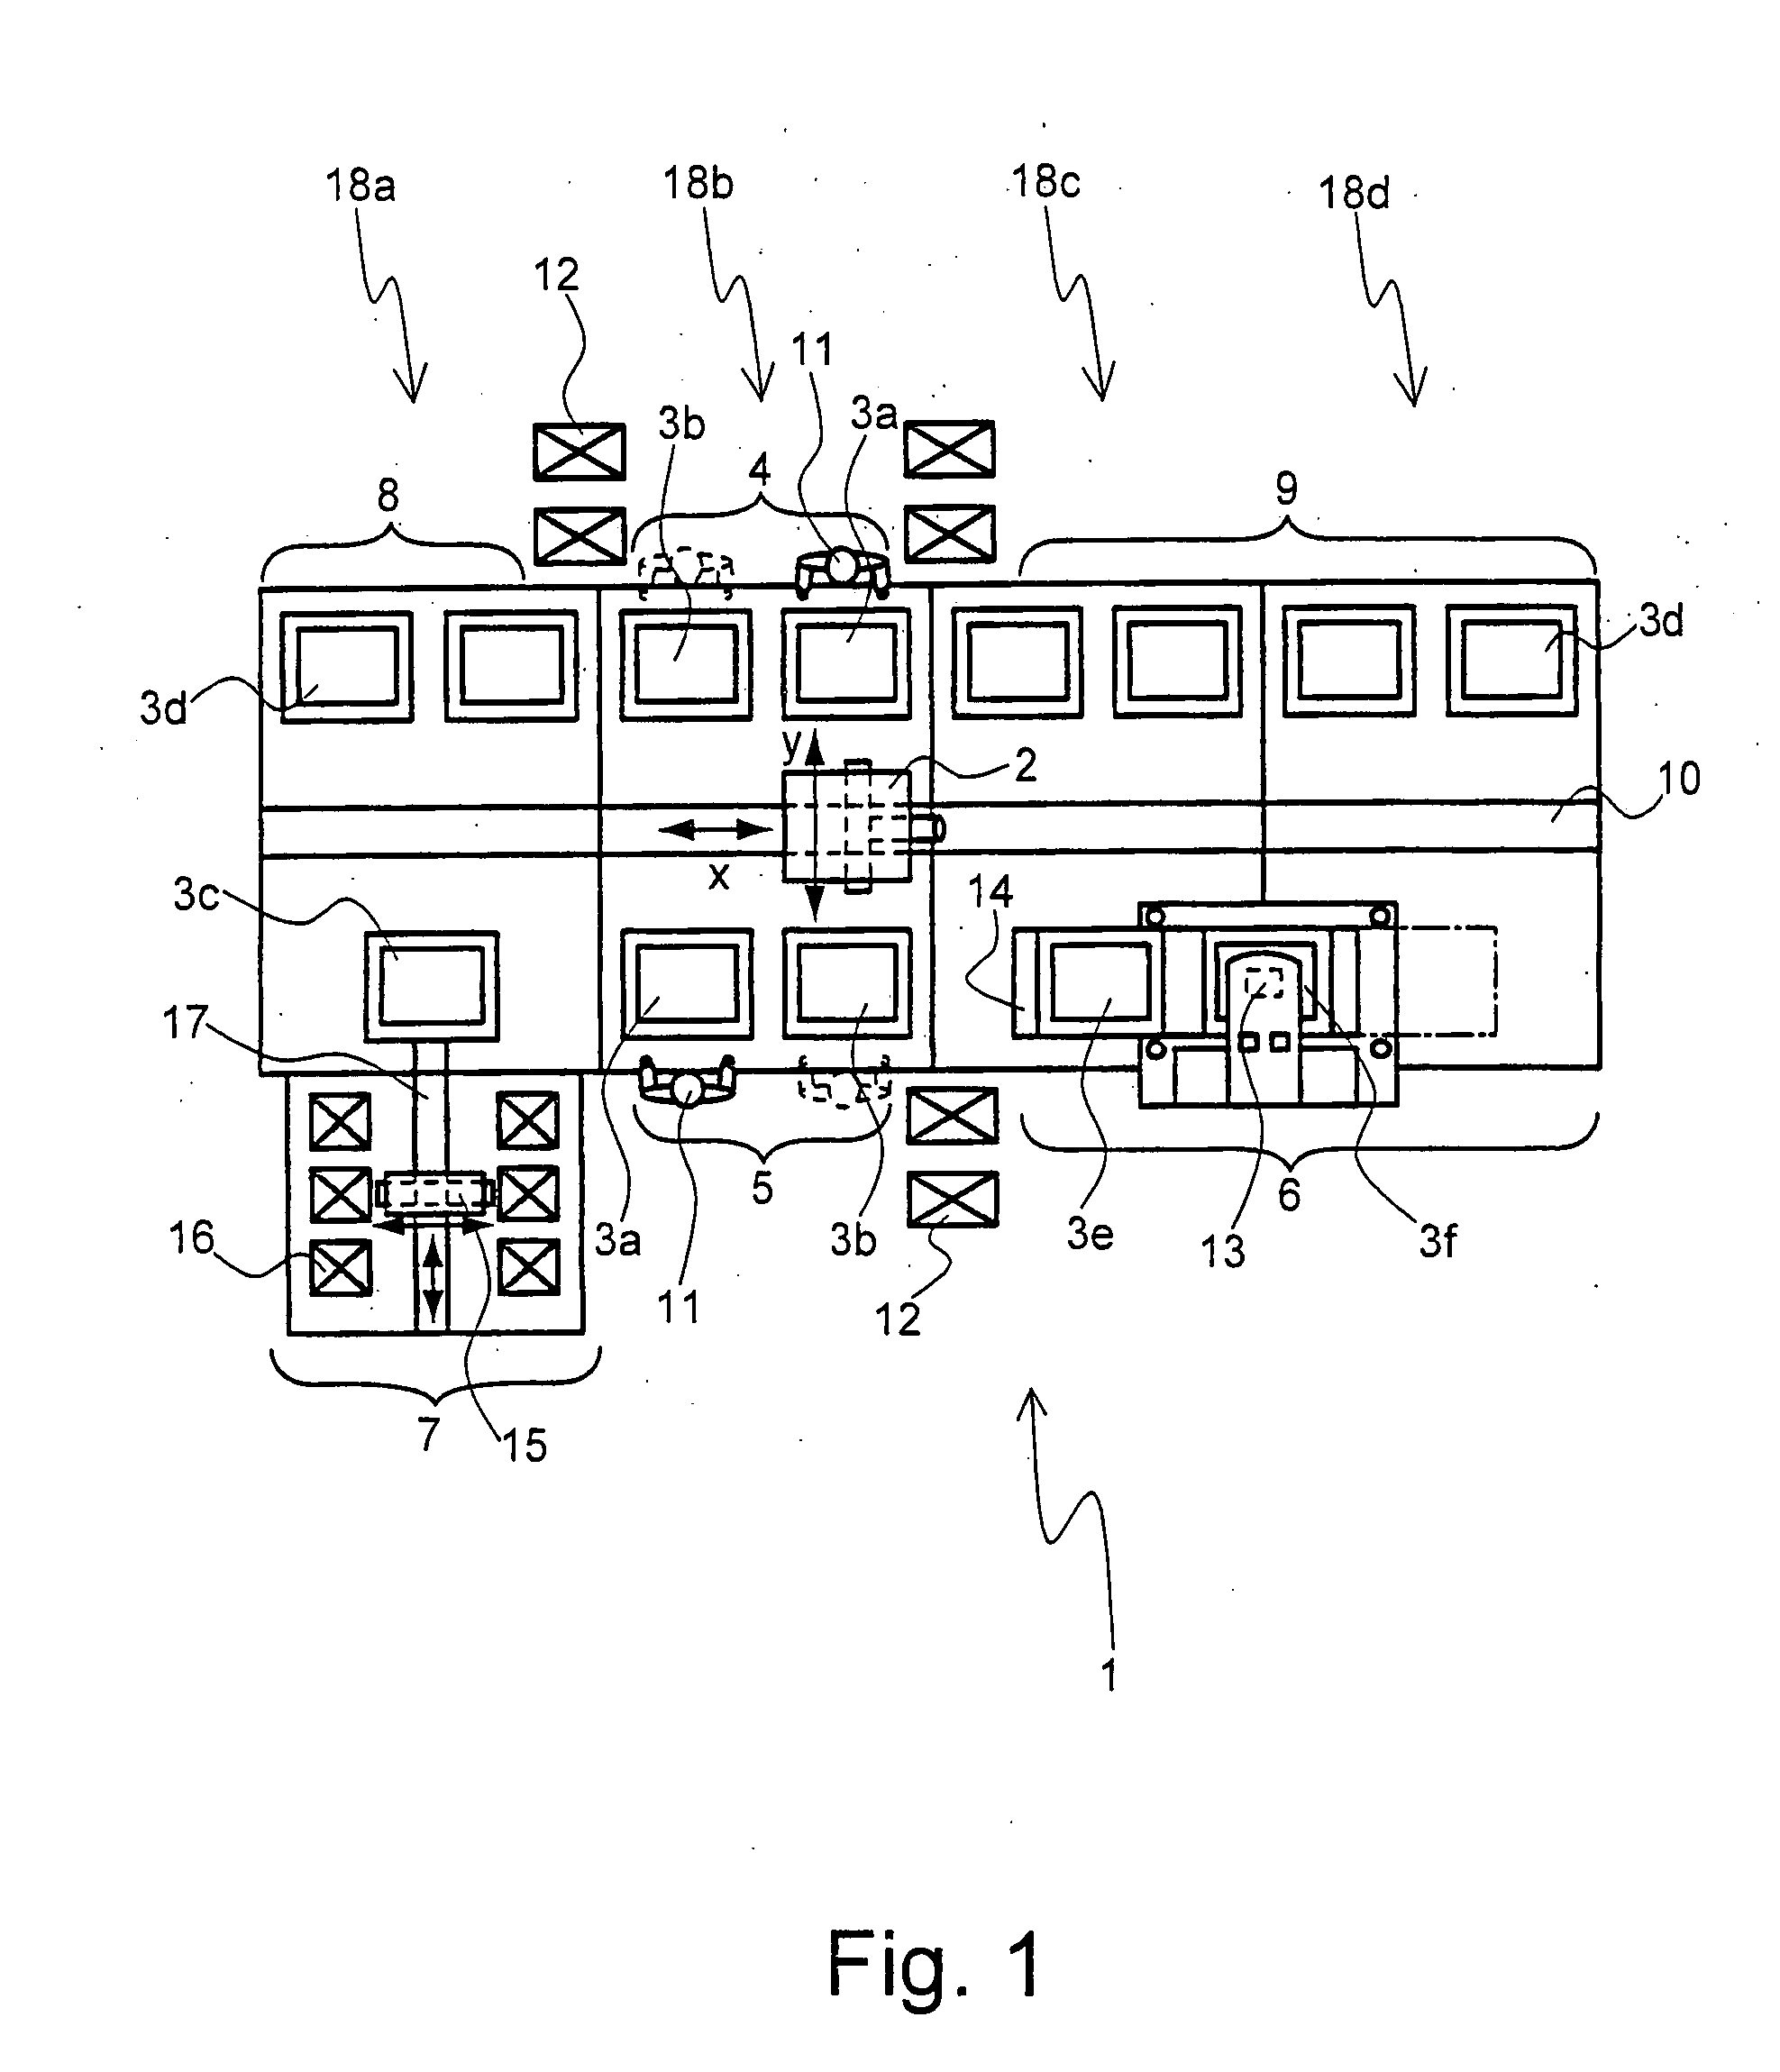 Assembly Cell For Assembling Modules From Work Pieces On Pallets, As Well As Method For Its Operation